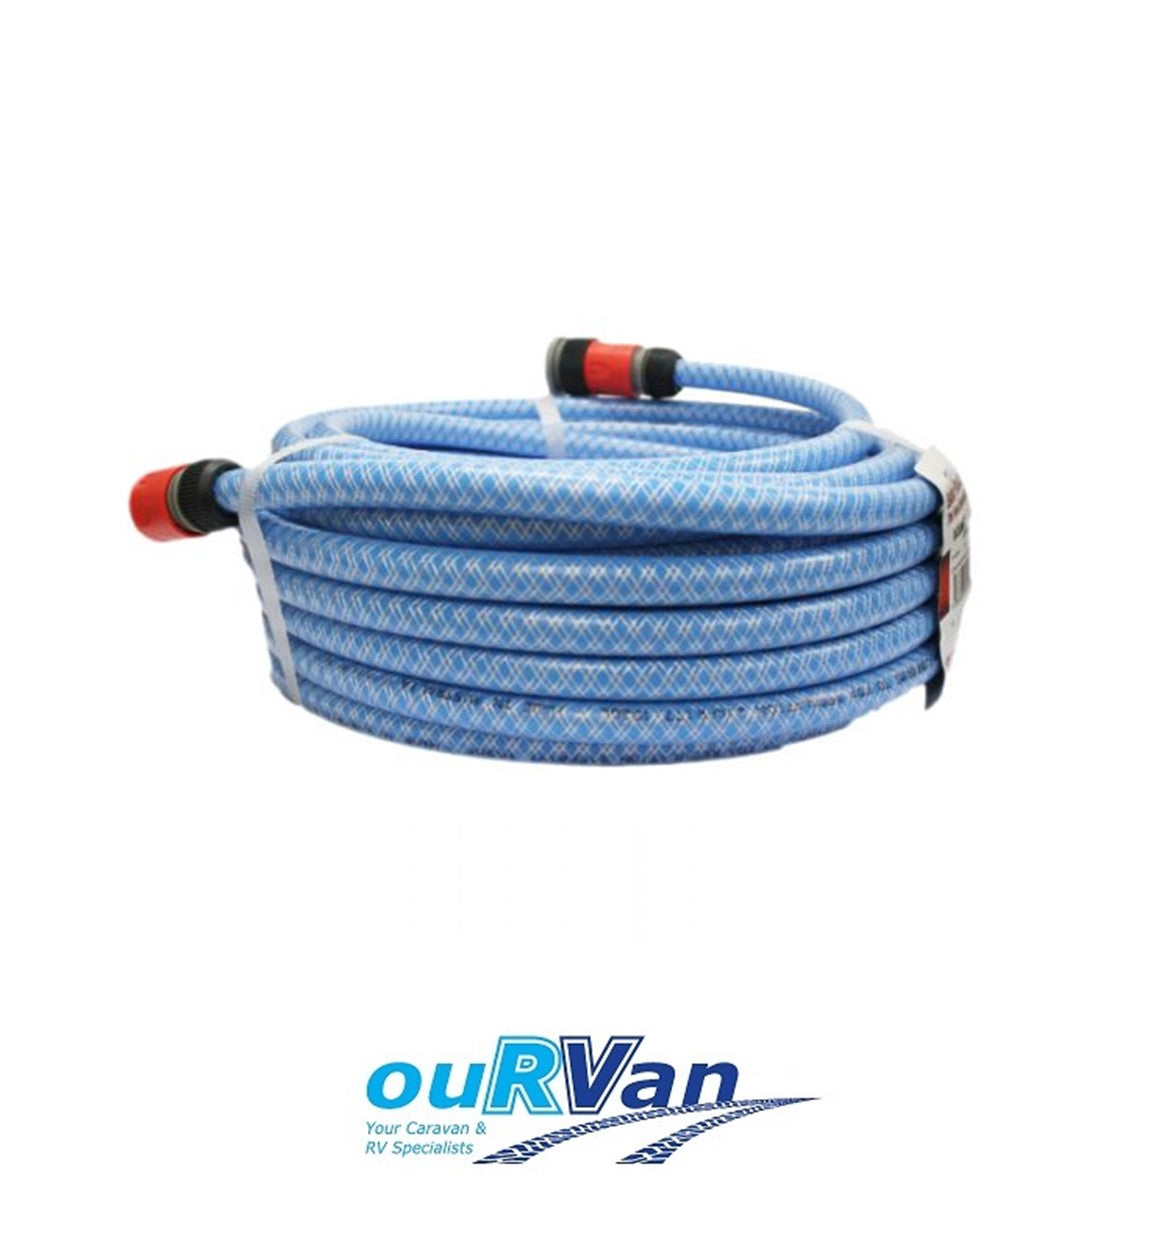 DRINKING WATER HOSE 20M X 12MM WITH FITTINGS CARAVAN